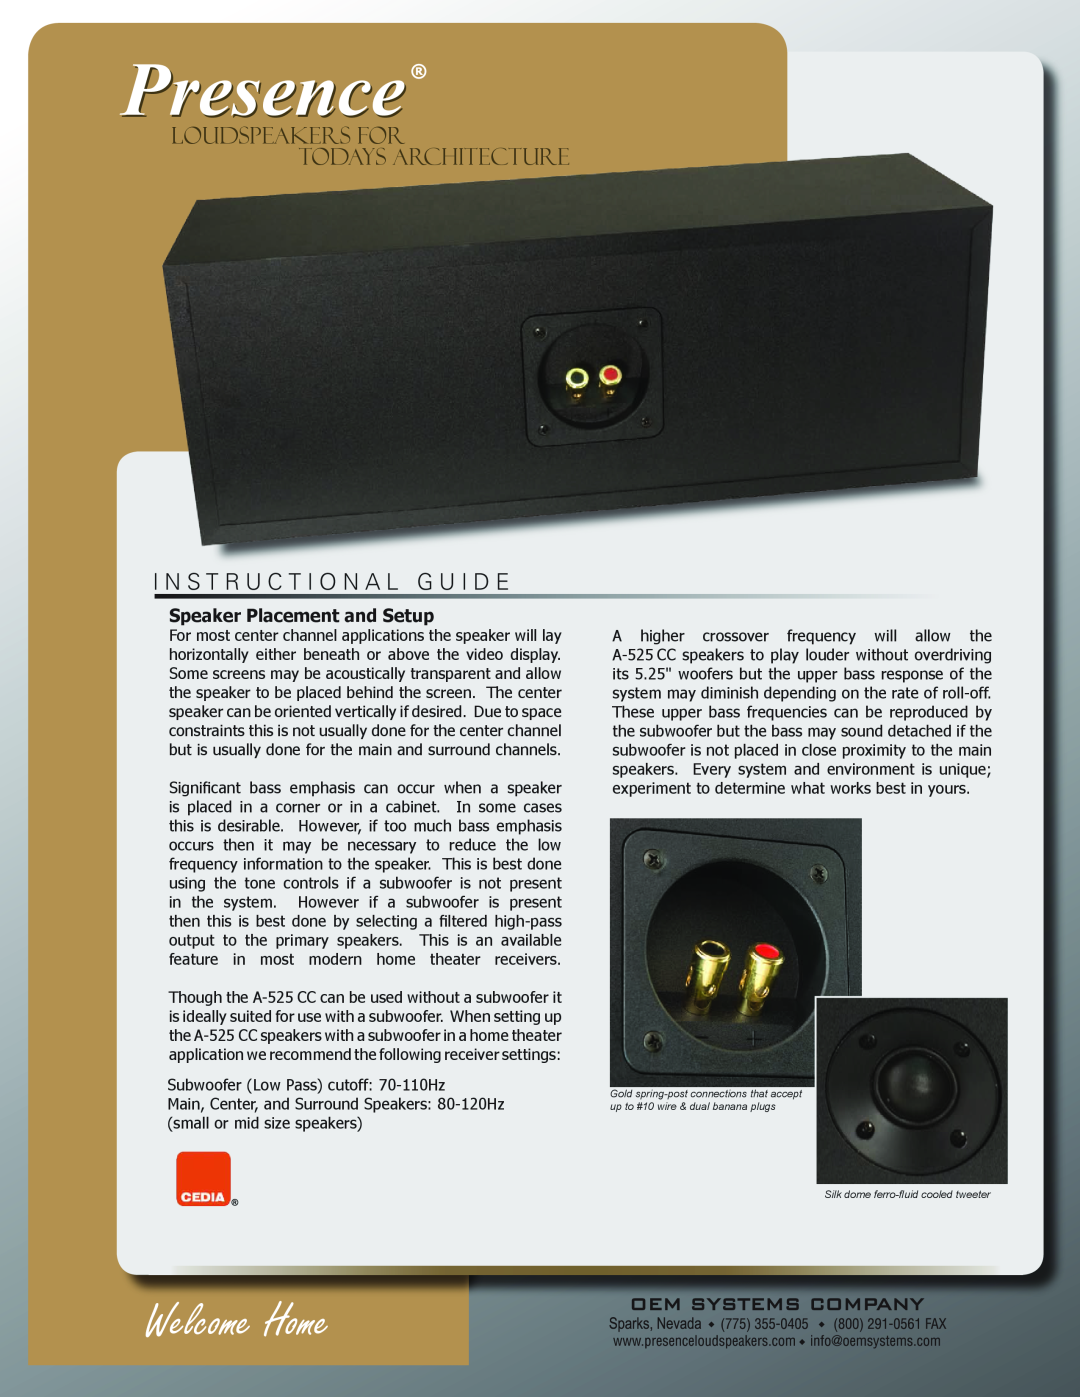 OEM Systems A-525 CC I N S T R U C T I O N A L G U I D E, Presence, Welcome Home, Loudspeakers For Todays Architecture 